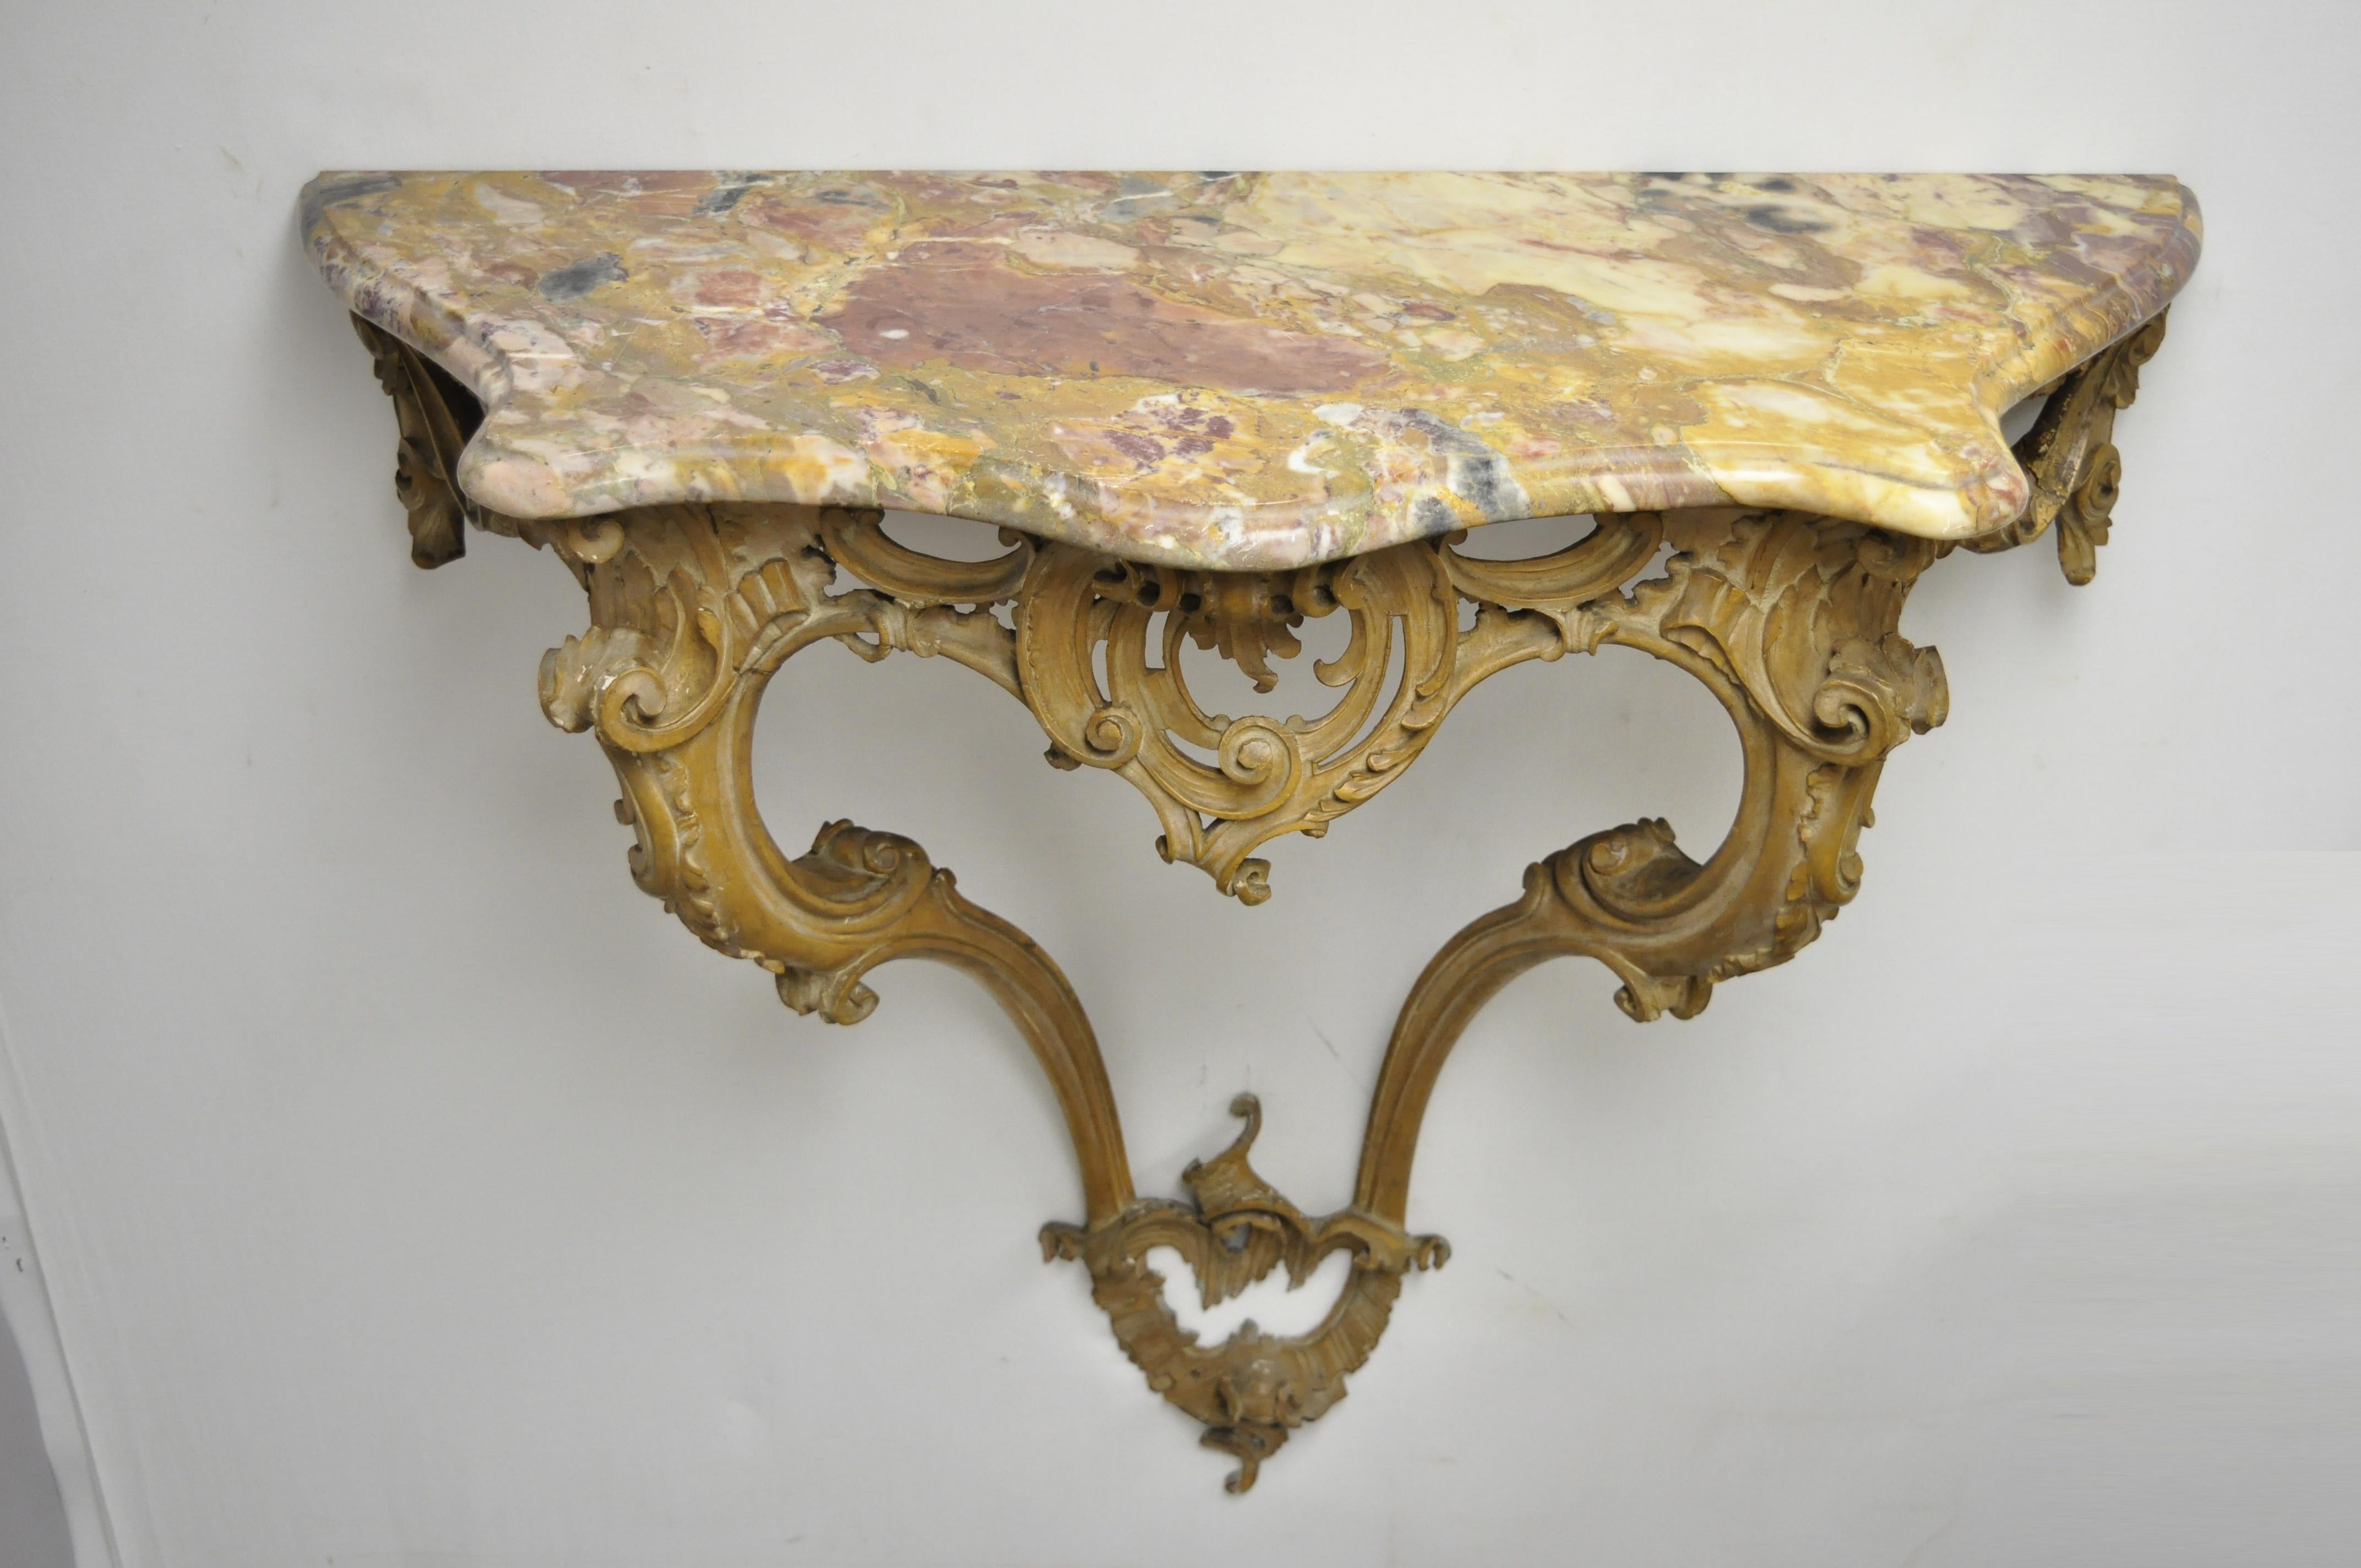 Antique French Louis XV Rococo Italian wall-mounted carved wood and marble-top console table. Item features hand carved acanthus scrollwork wooden base, shaped marble top, very nice antique item, table to be mounted to wall (mounting hardware not